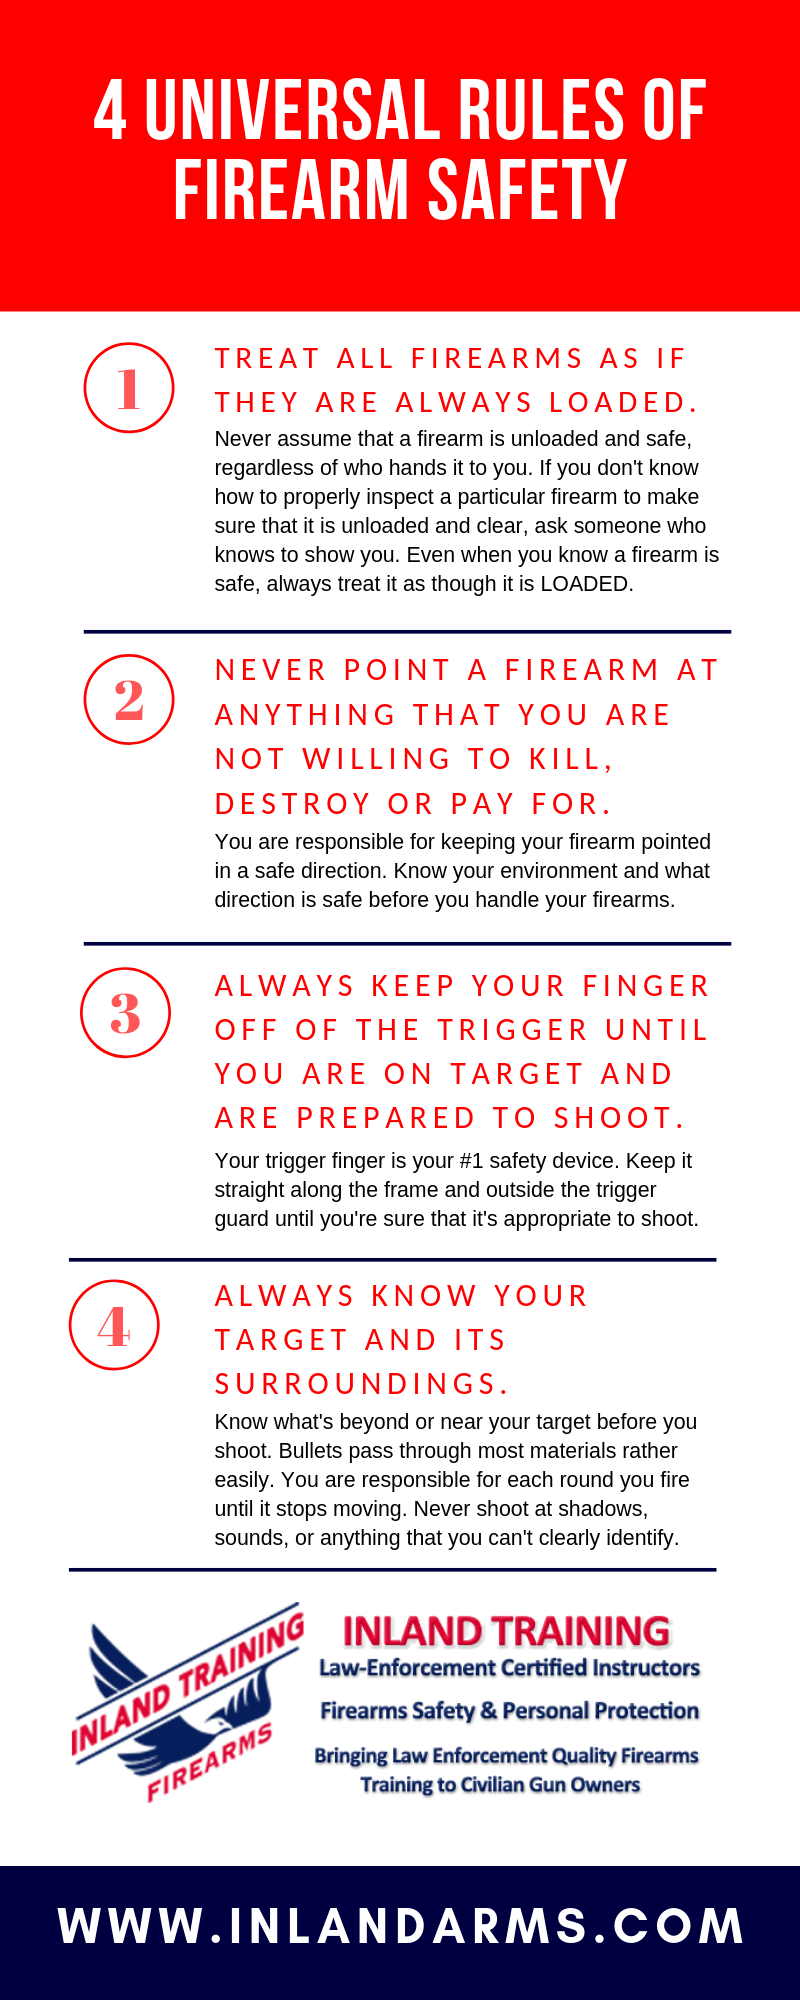 4 Universal Rules of Firearm Safety